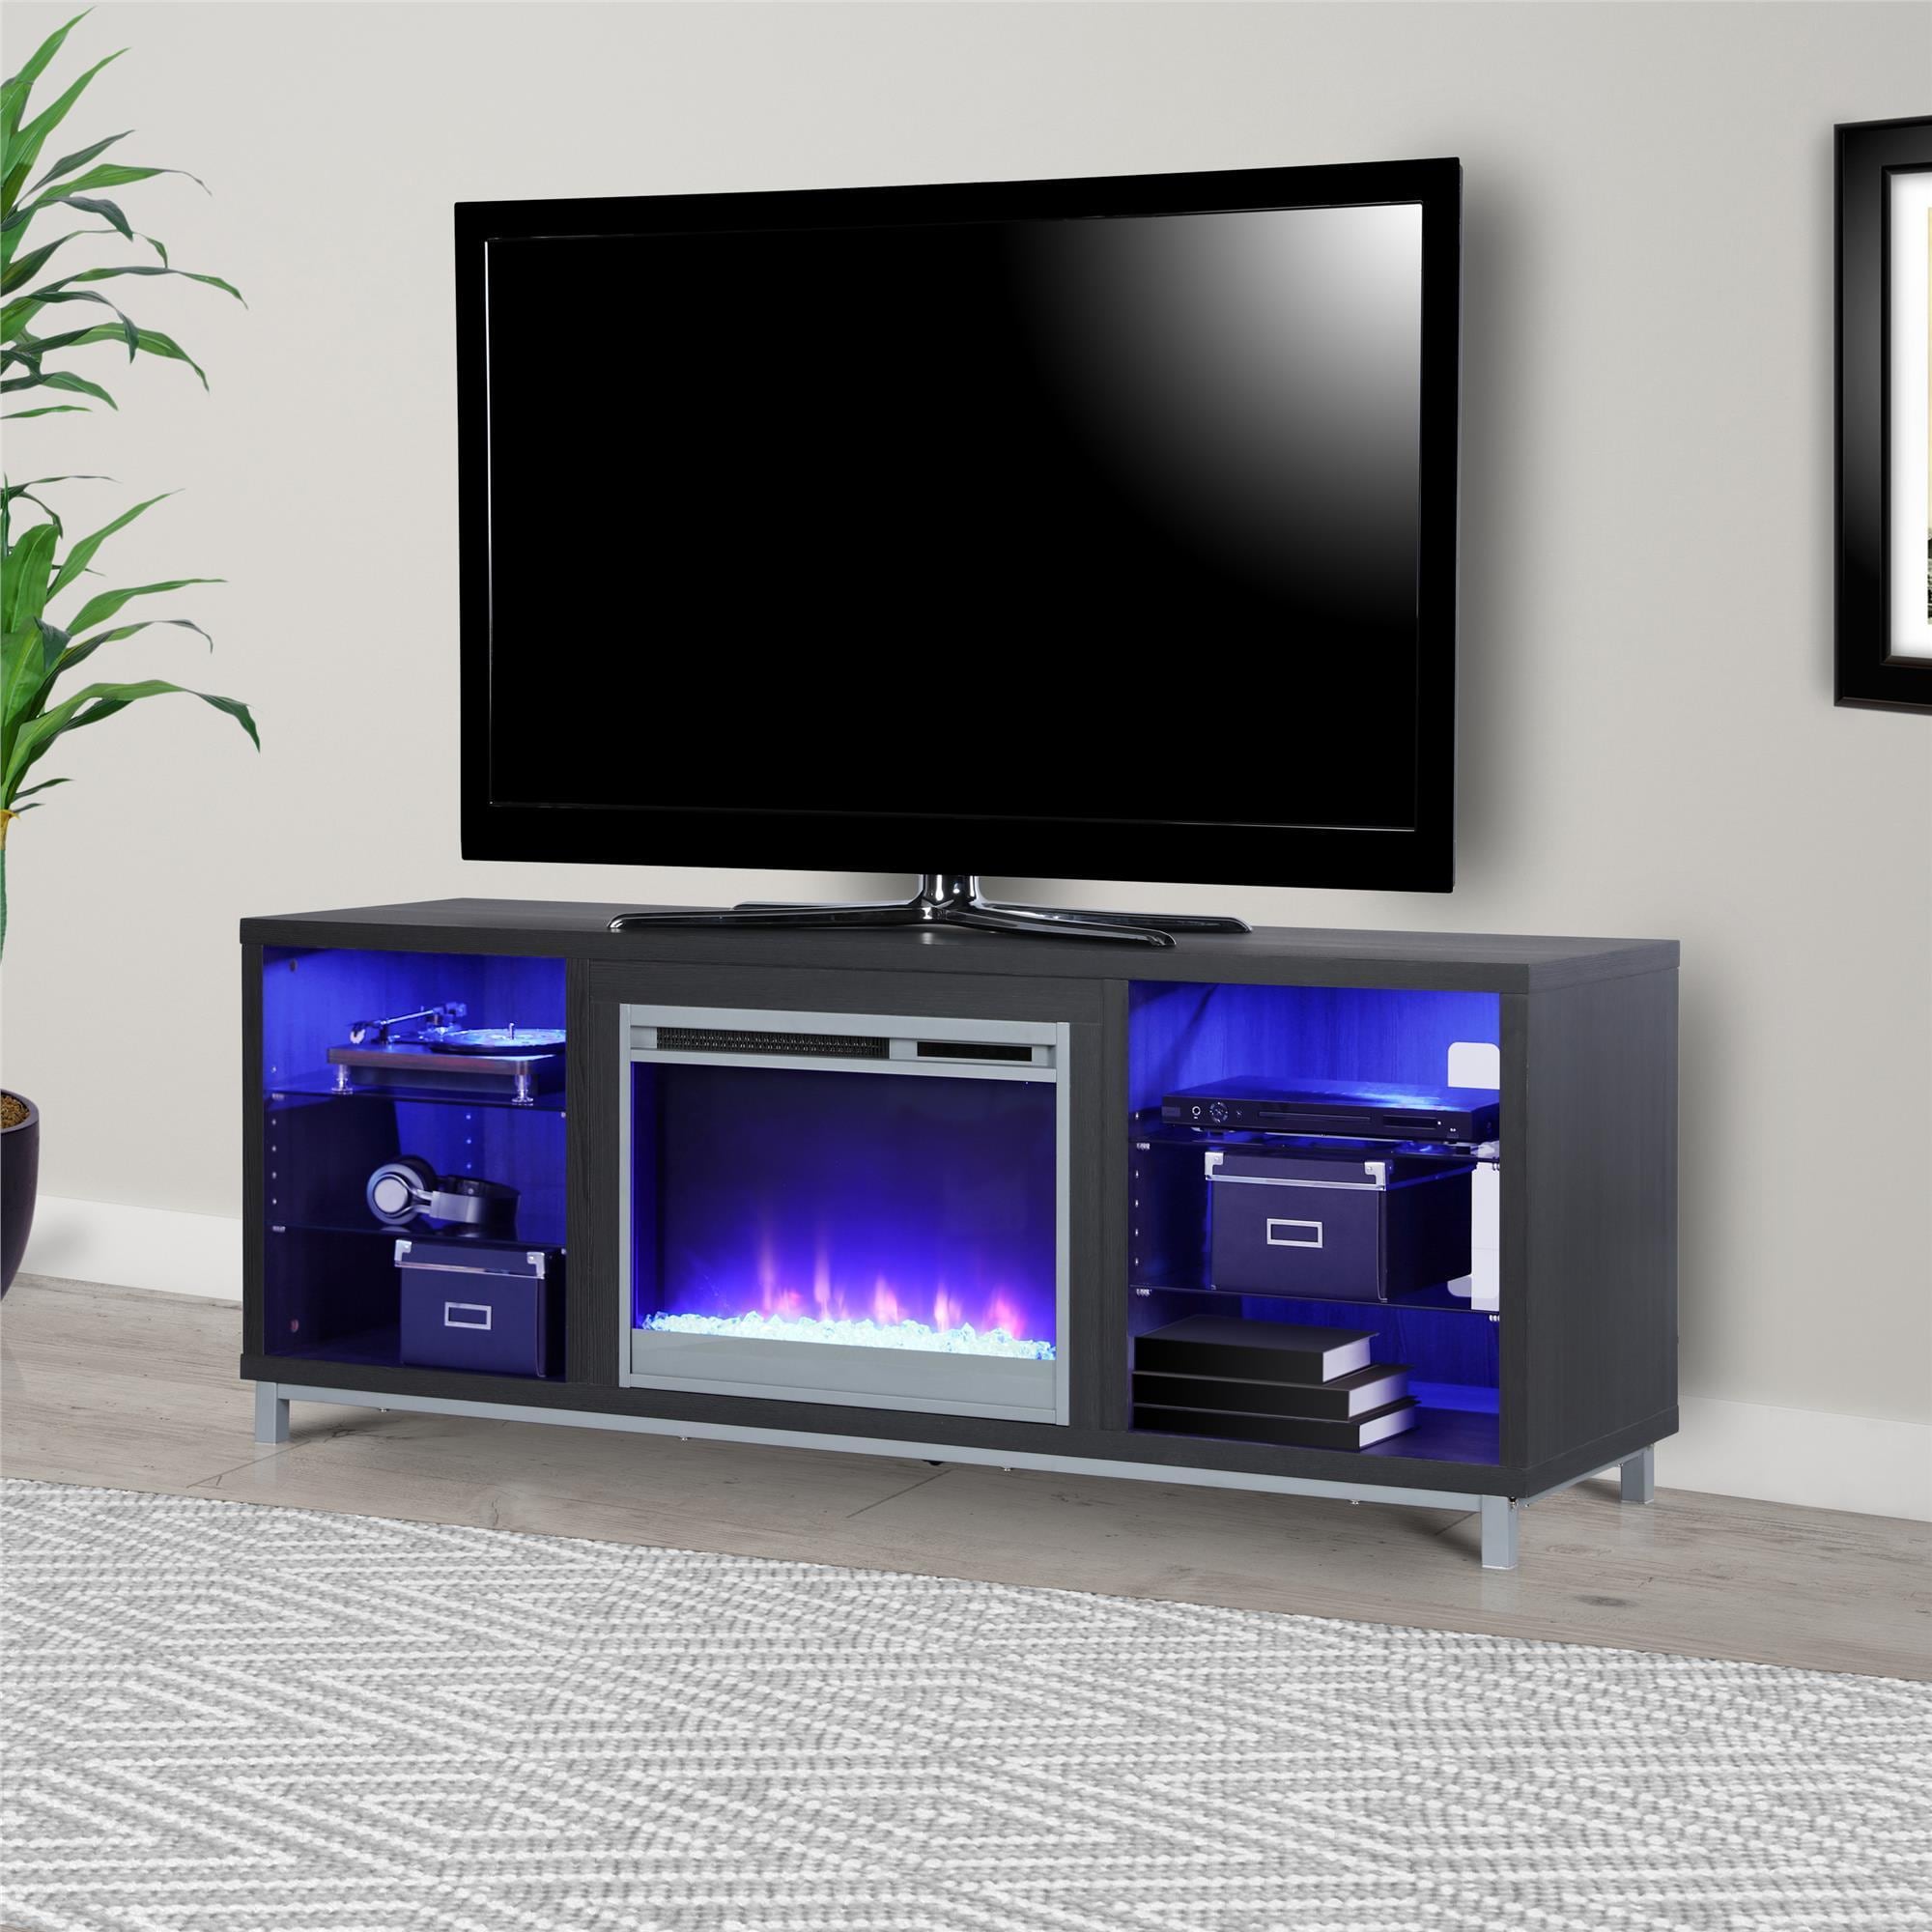 Shop Avenue Greene Westwood Fireplace Tv Stand For Tvs Up To 70